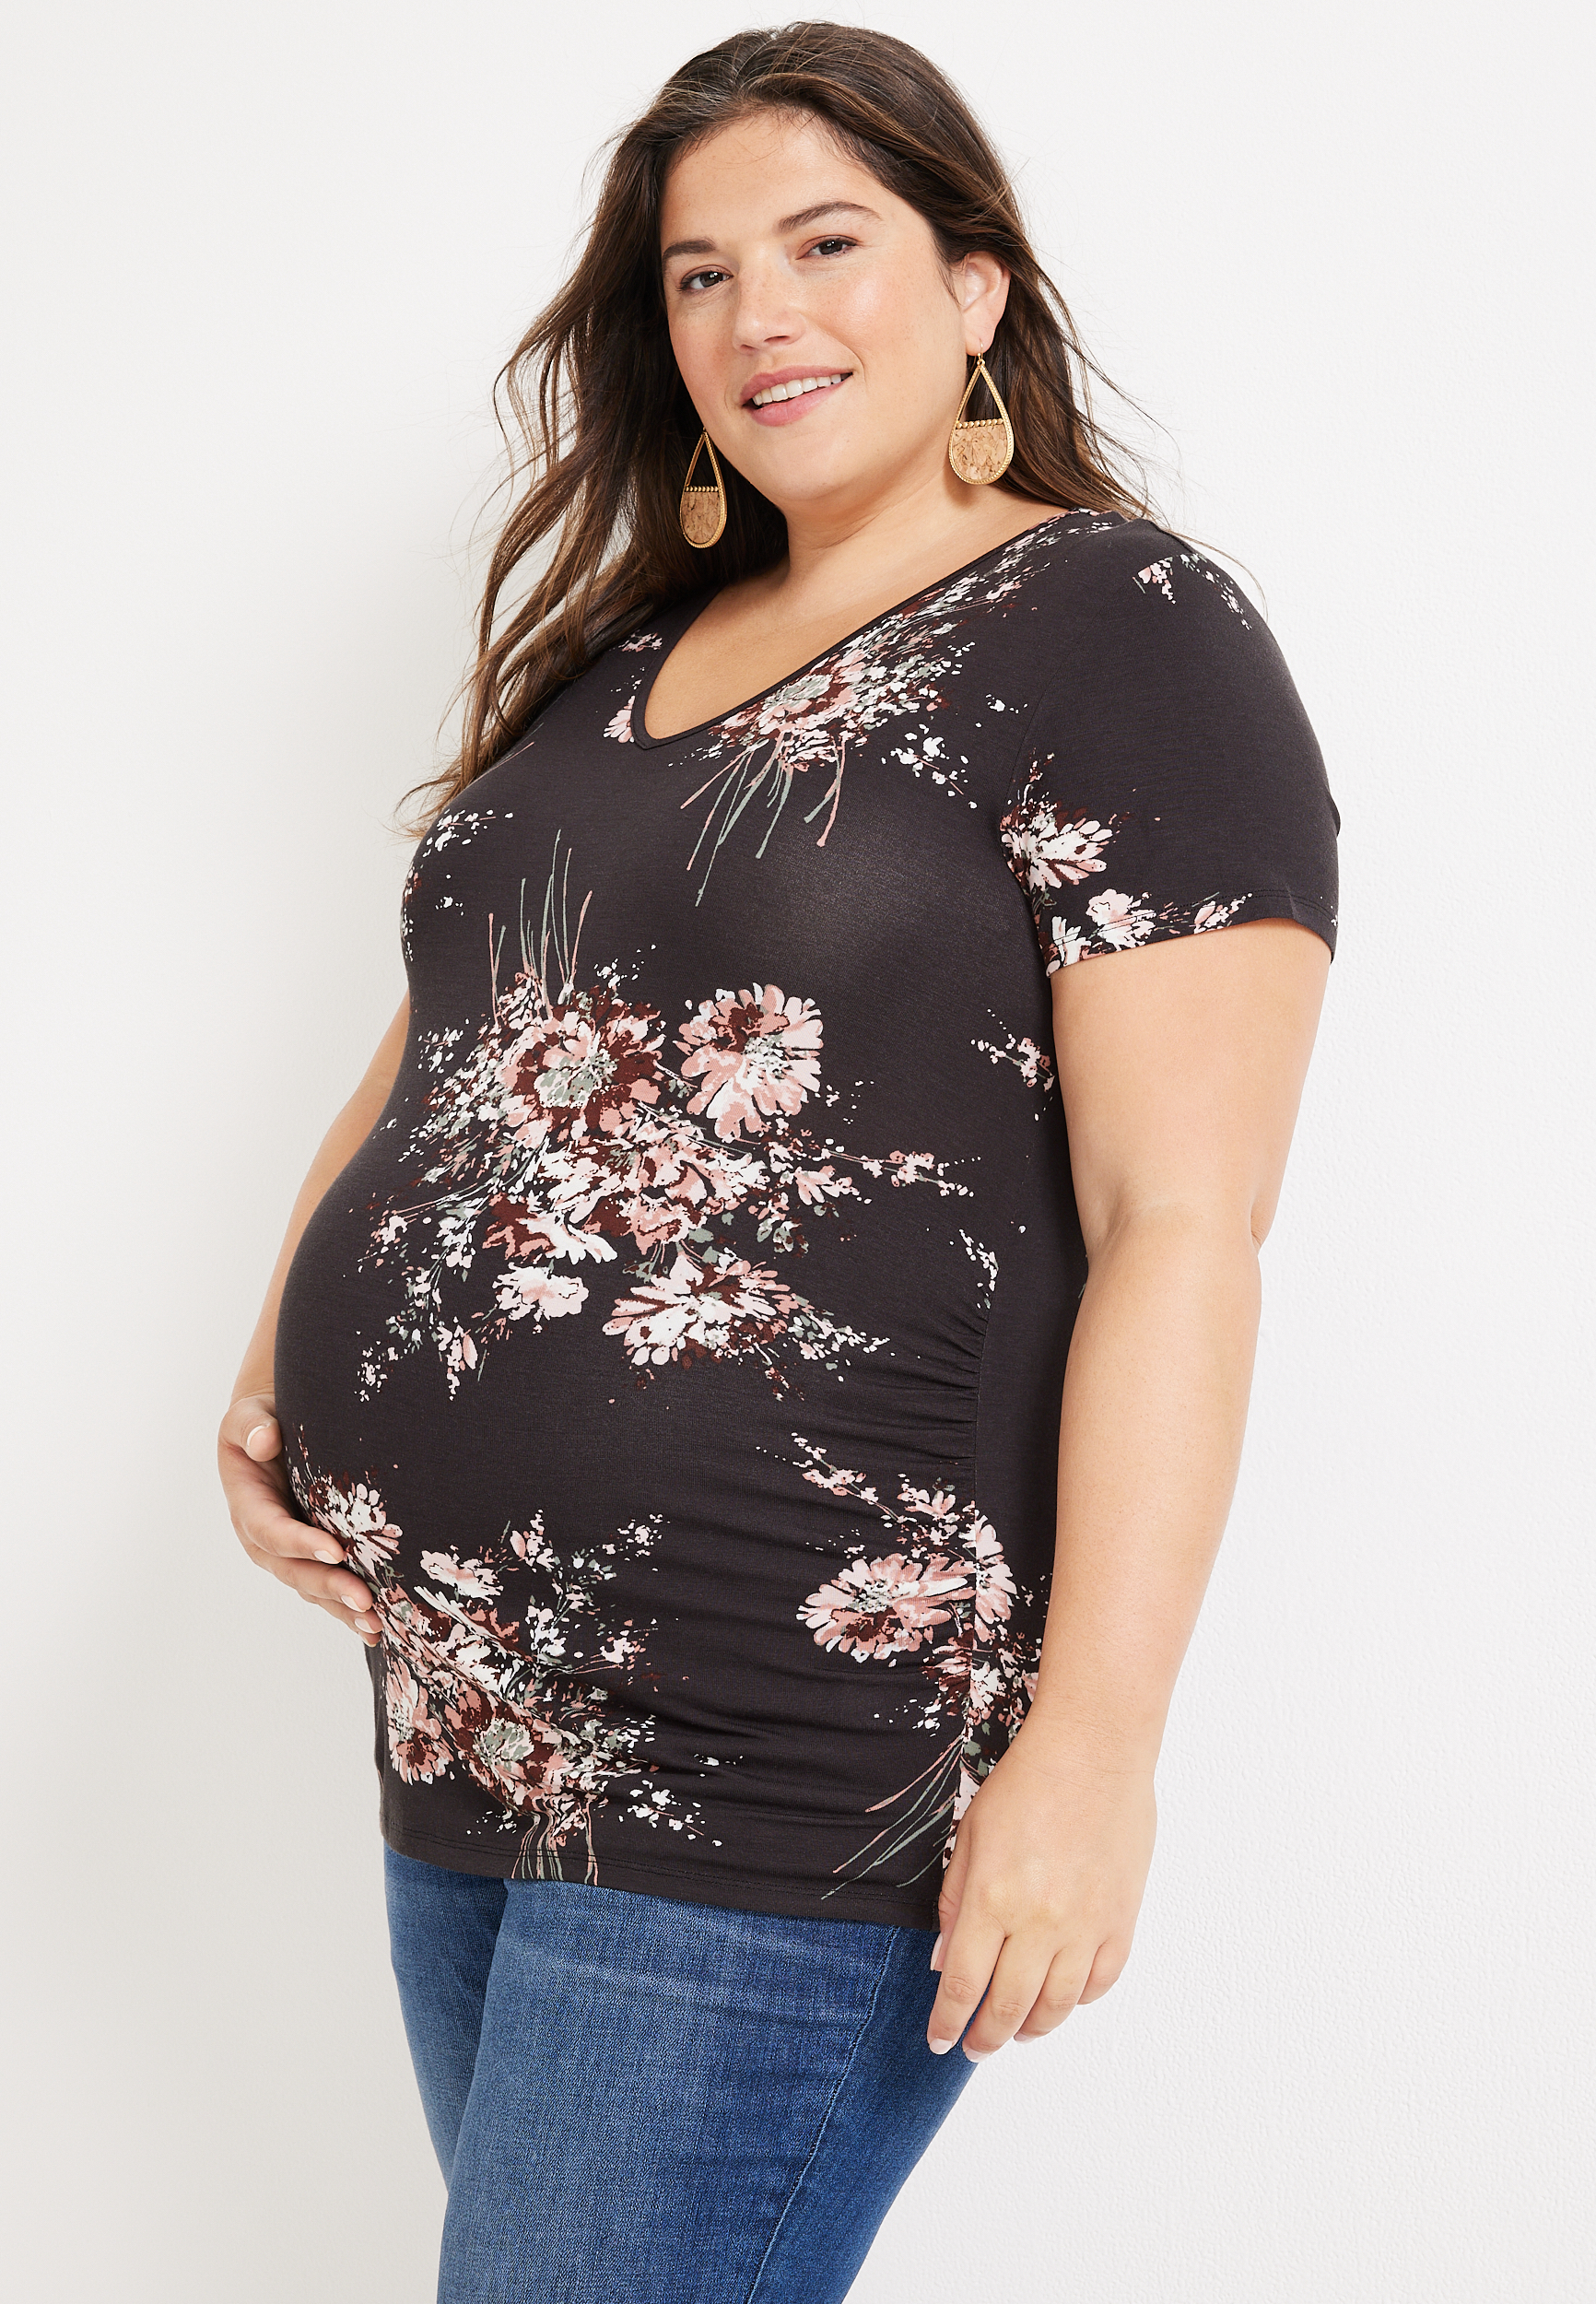 Plus Size Maternity Clothes You'll Actually Want to Wear - The Ultimate  Guide - The Plus Life